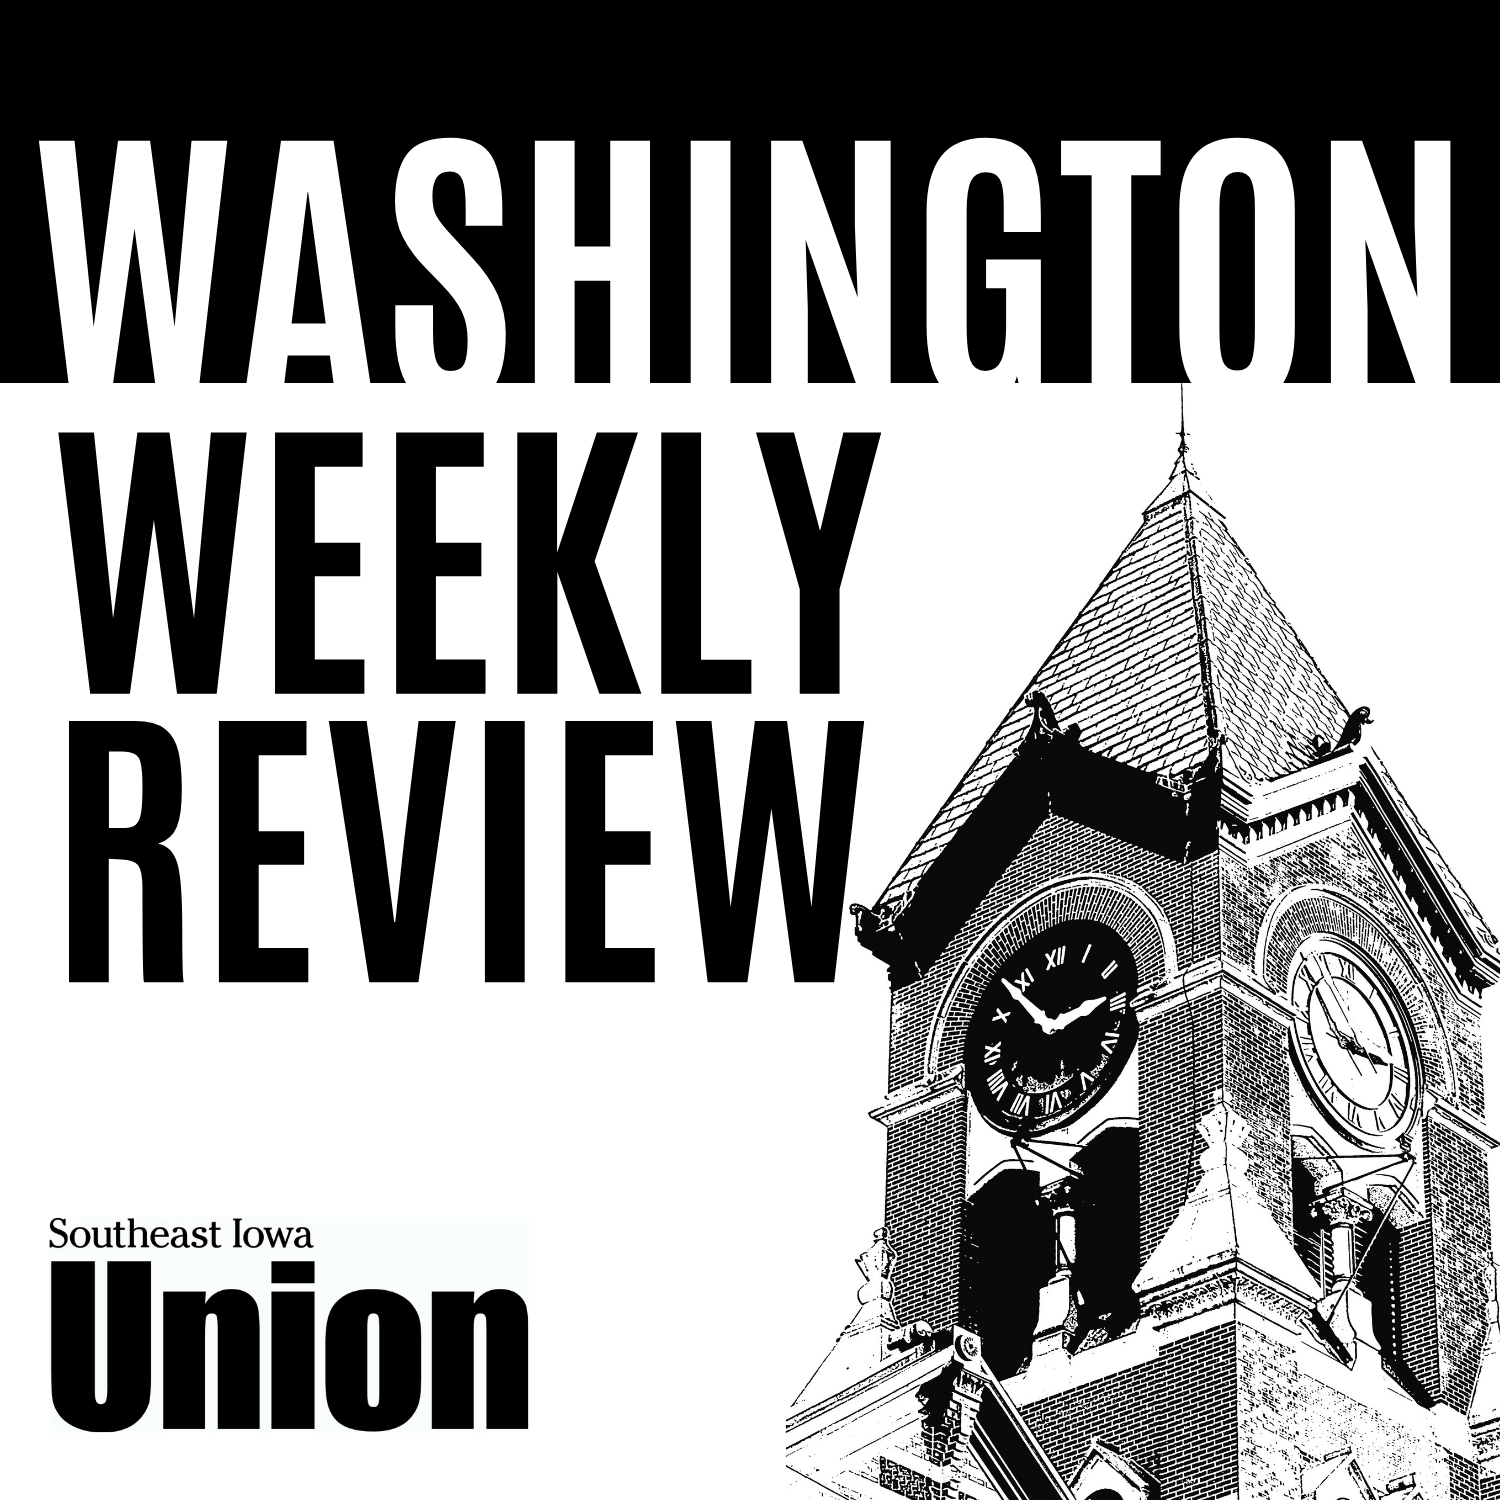 Artwork for Washington Weekly Review